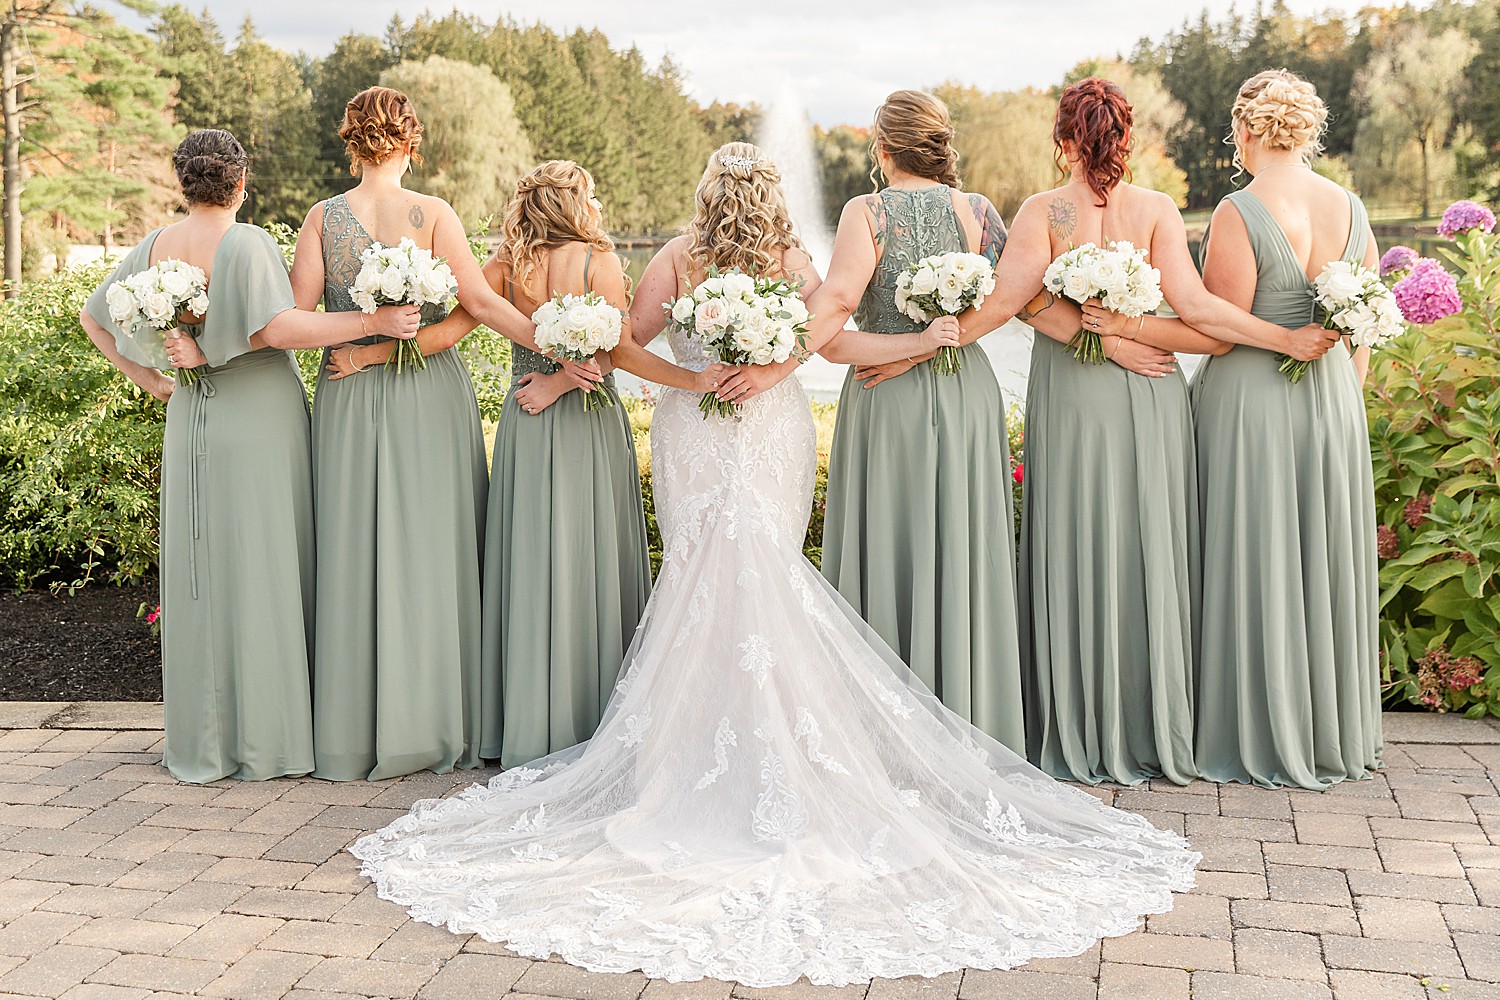 bride and bridesmaids link arms and show off back of dresses  